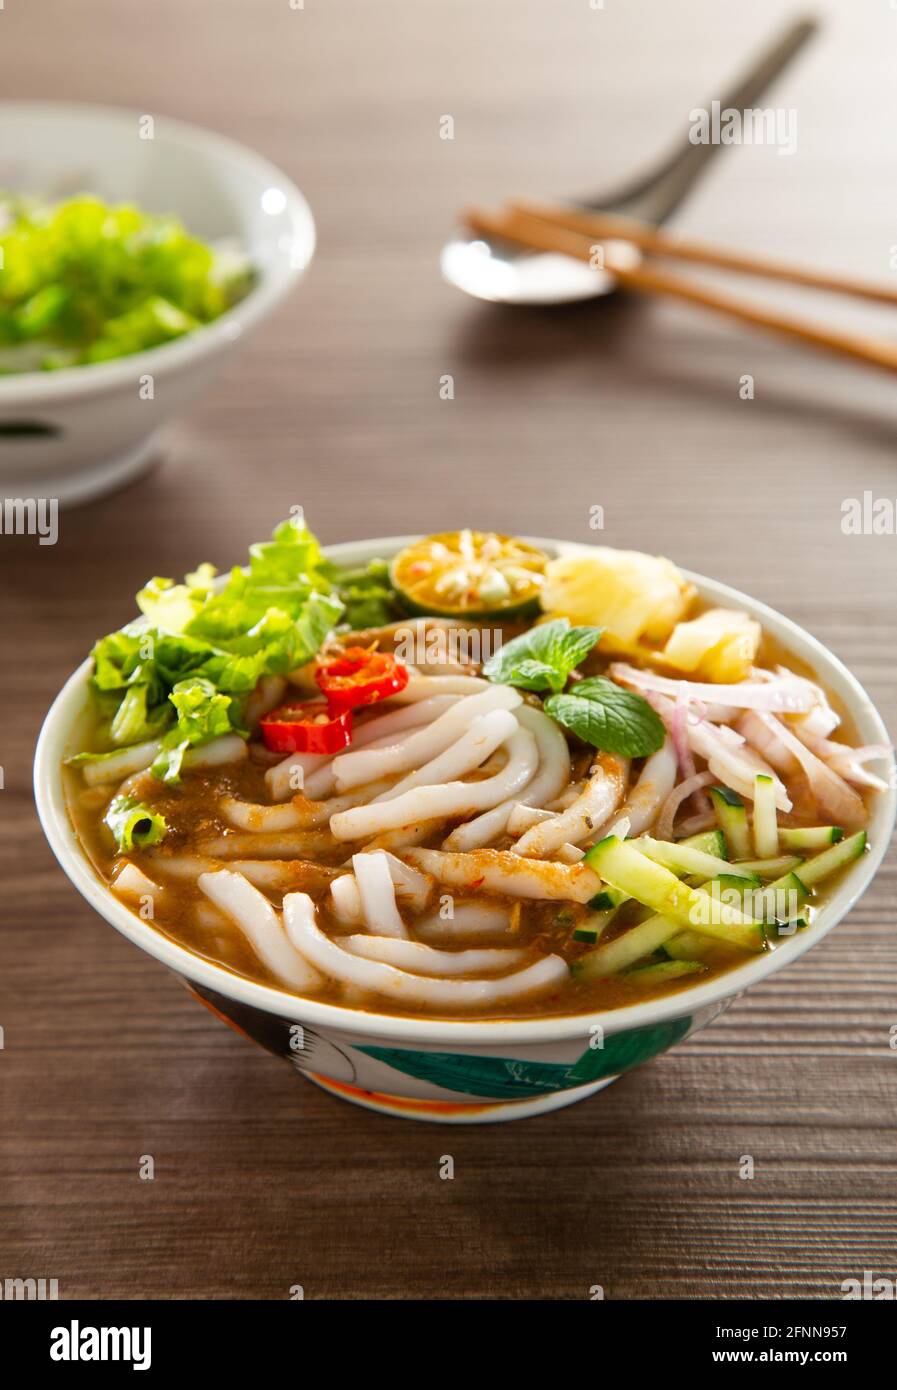 Assam Laksa (Noddle in Tangy Fish Gravy) is a Special Malaysian Popular Food Stock Photo